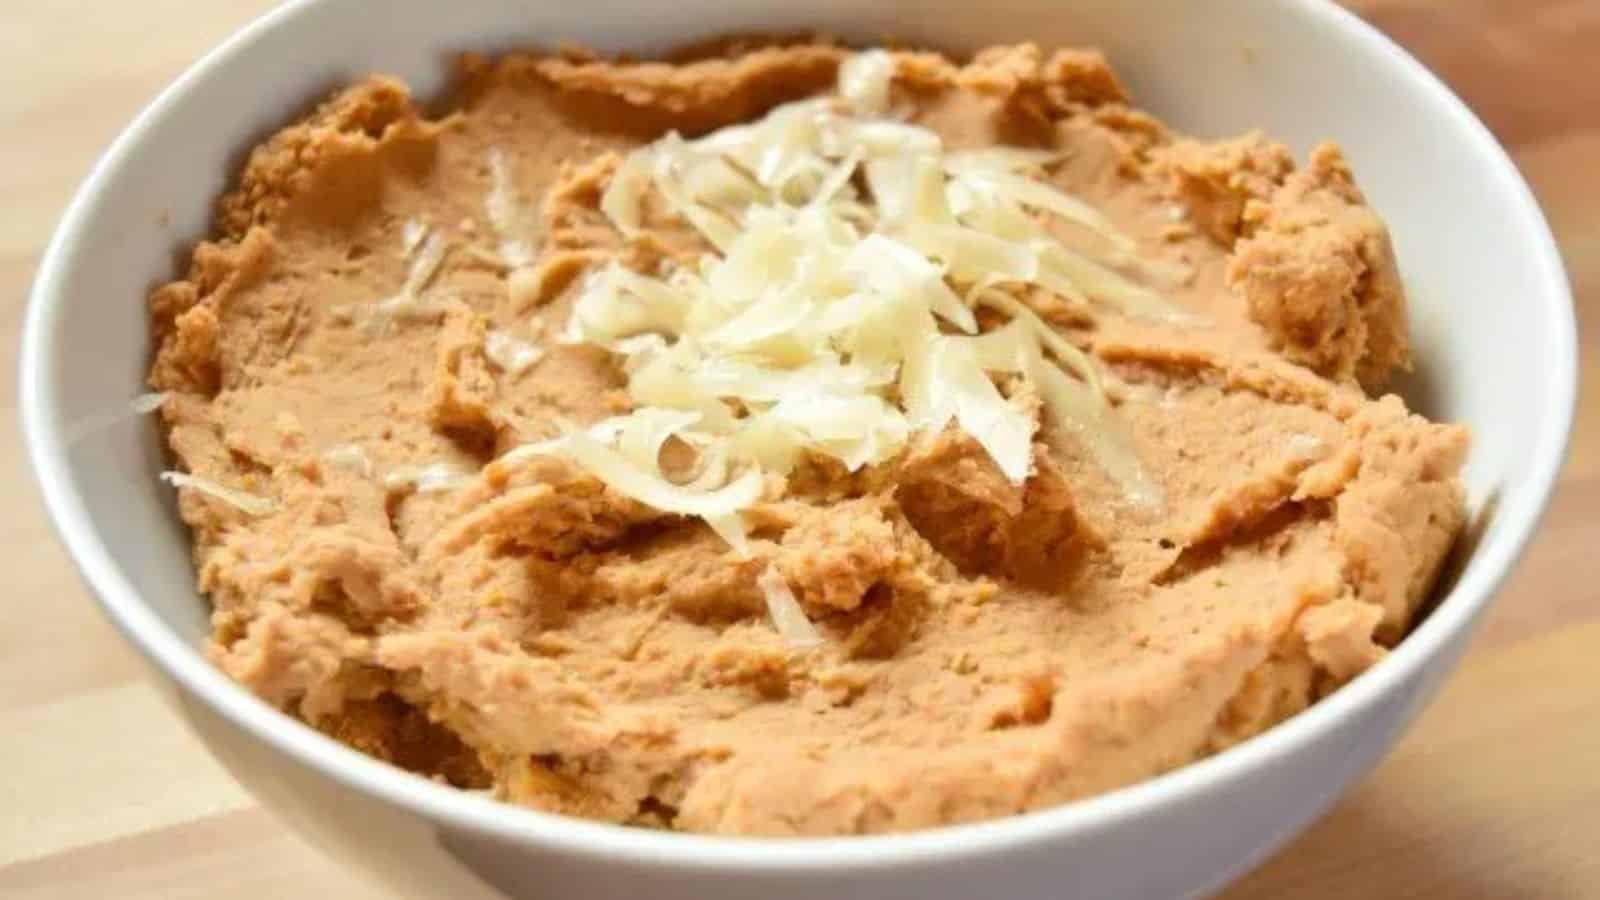 Image shows a bowl of Refried Beans up close.